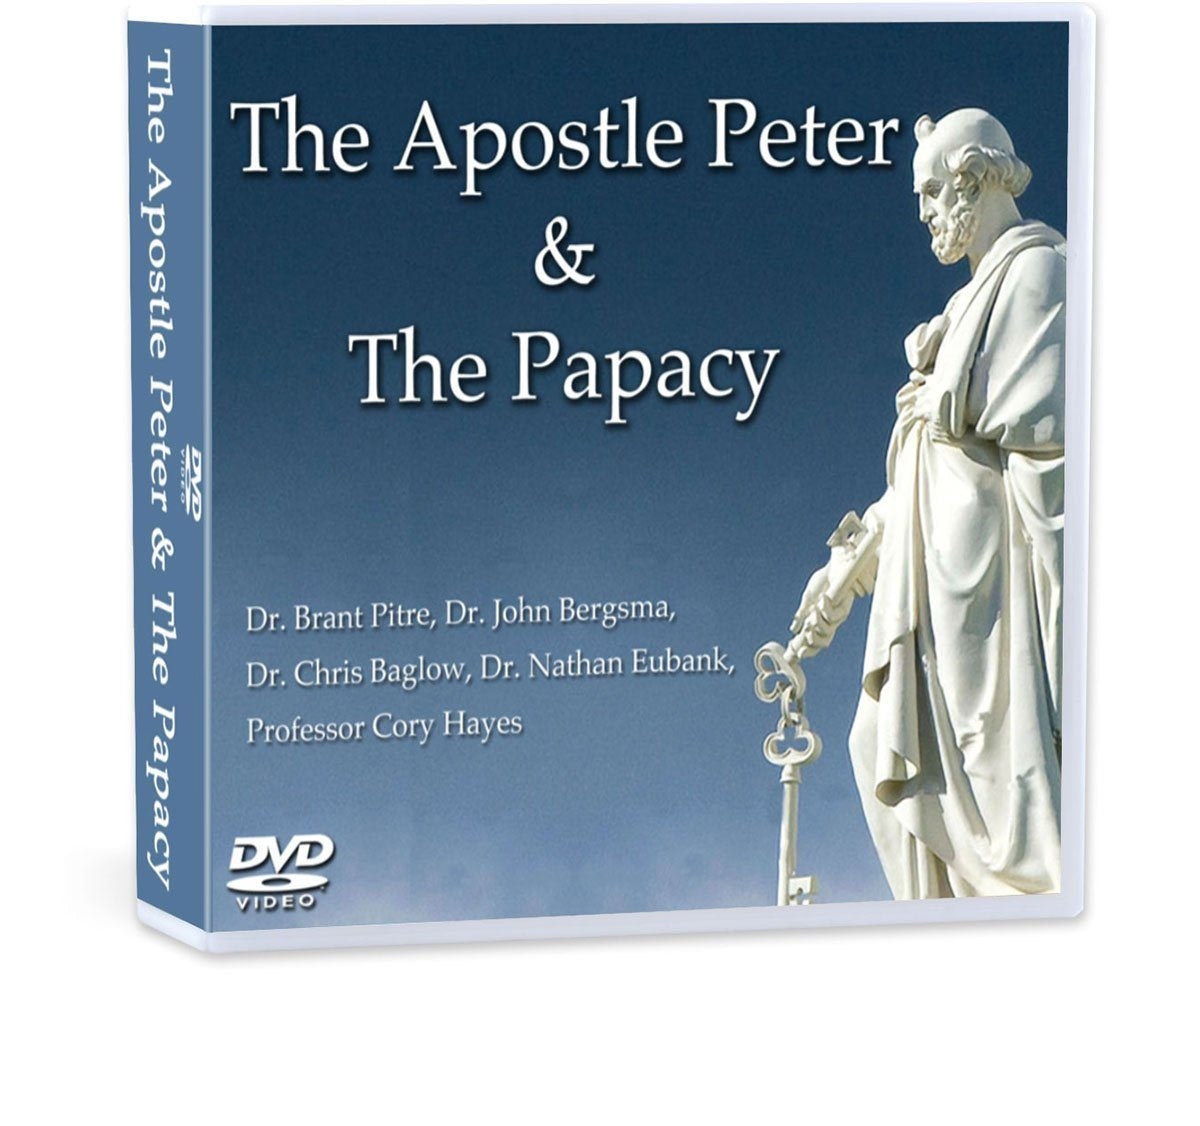 In this conference recording on CD on Peter and the Papacy learn about Peter's spiritual development in scripture, the infallibility yet sinfulness of Popes, the relationship of bishops and the Pope and Peter as the Rock of the Church Jesus founded.